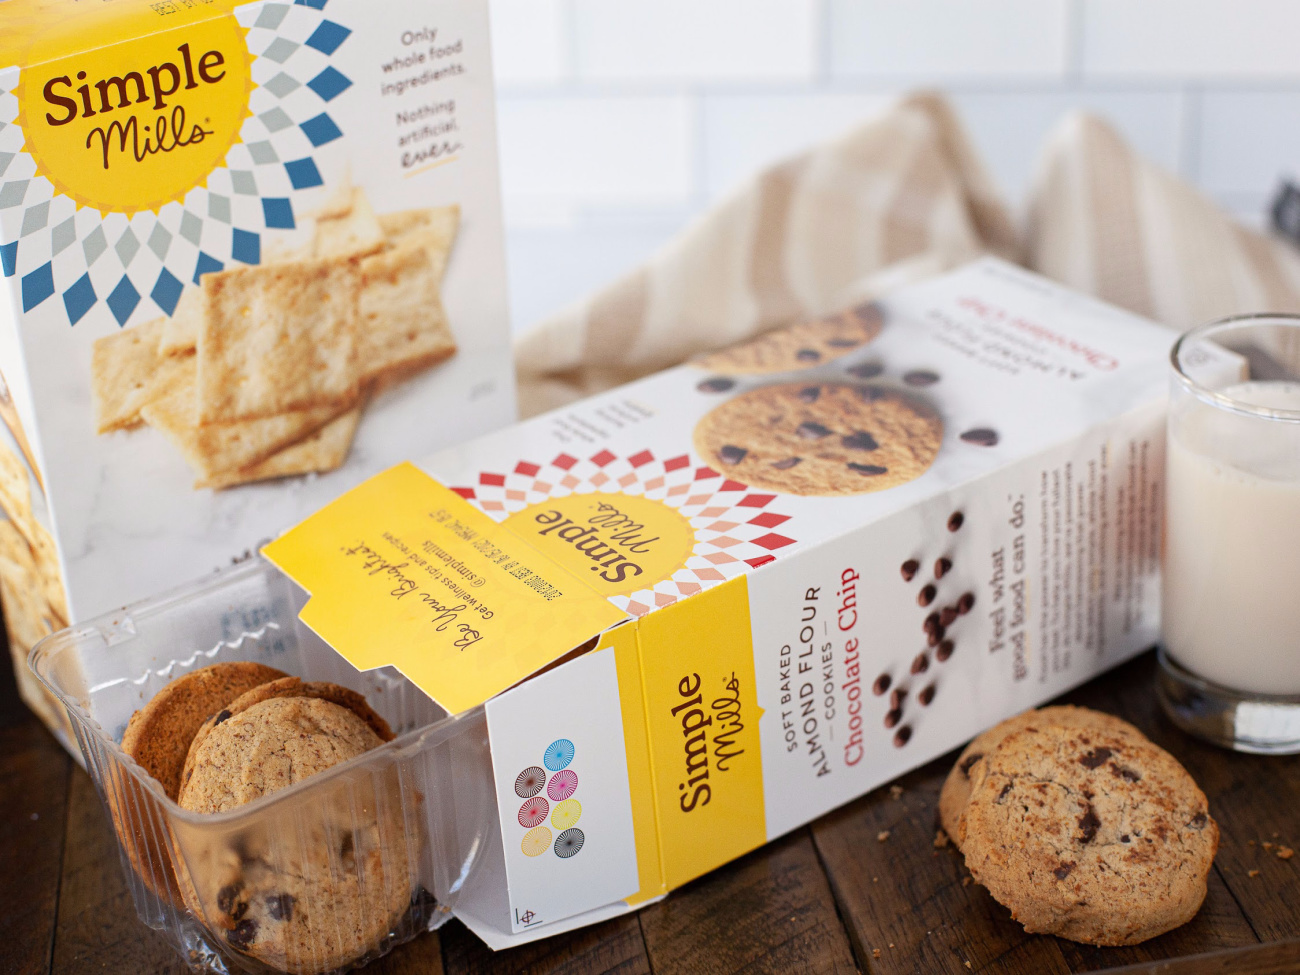 Simple Mills Crackers Just $2.79 At Publix (Plus Cheap Cookies) on I Heart Publix